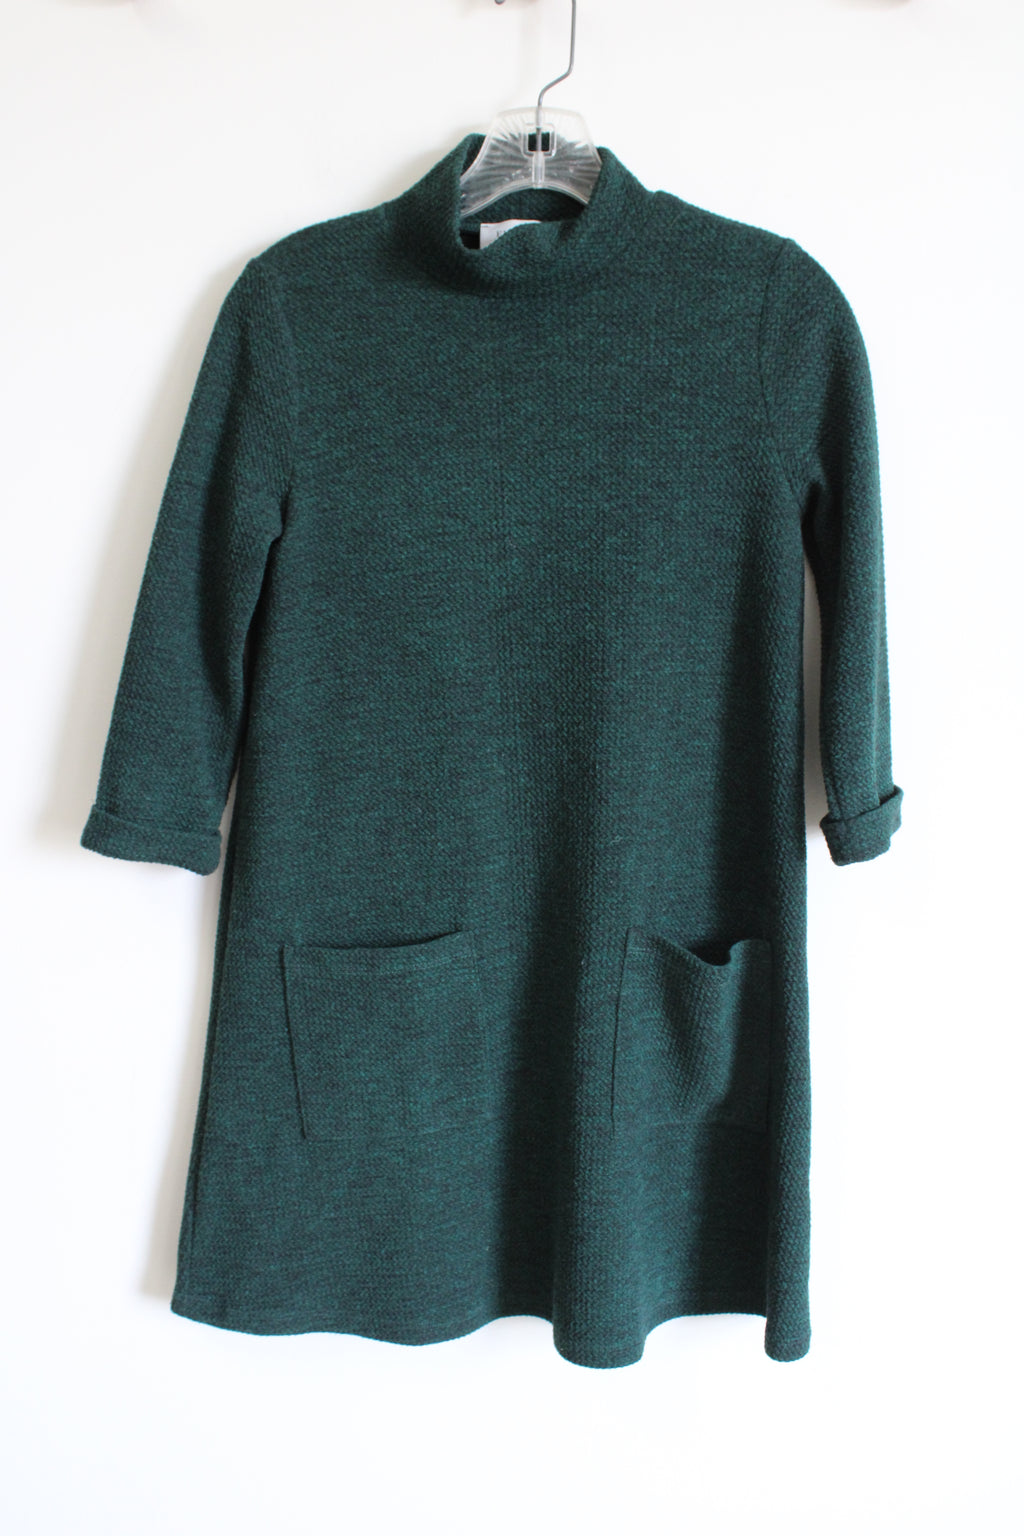 Everly Green Knit Mock Neck Tunic Top | S